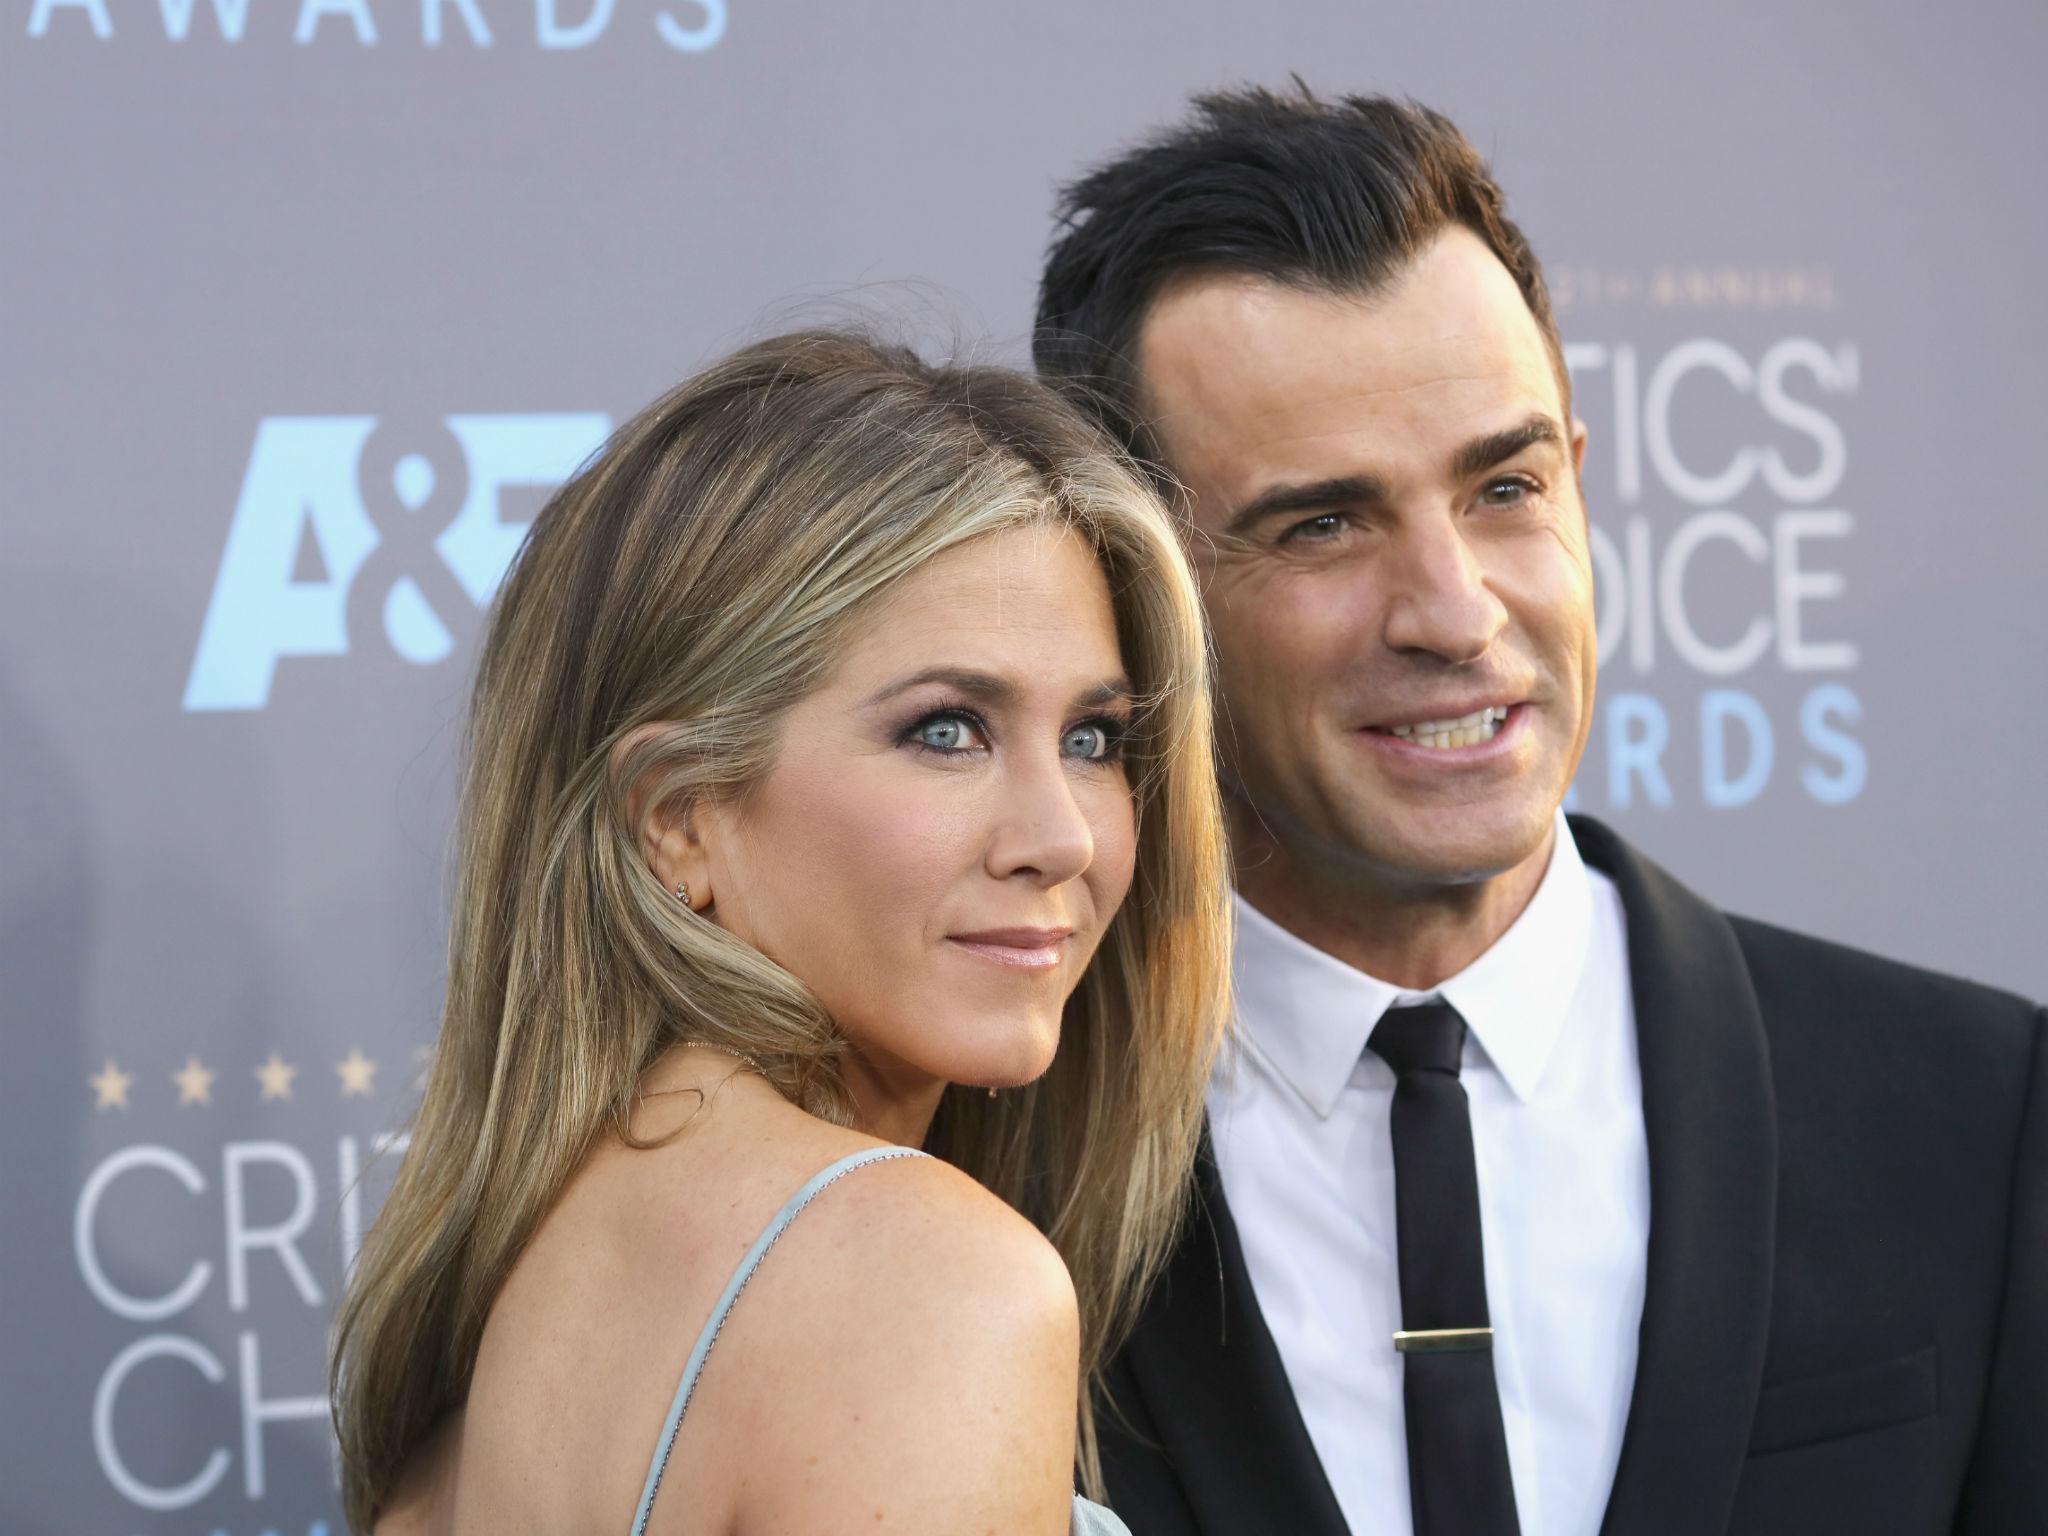 Jennifer Aniston's husband Justin Theroux reflects on difficulties